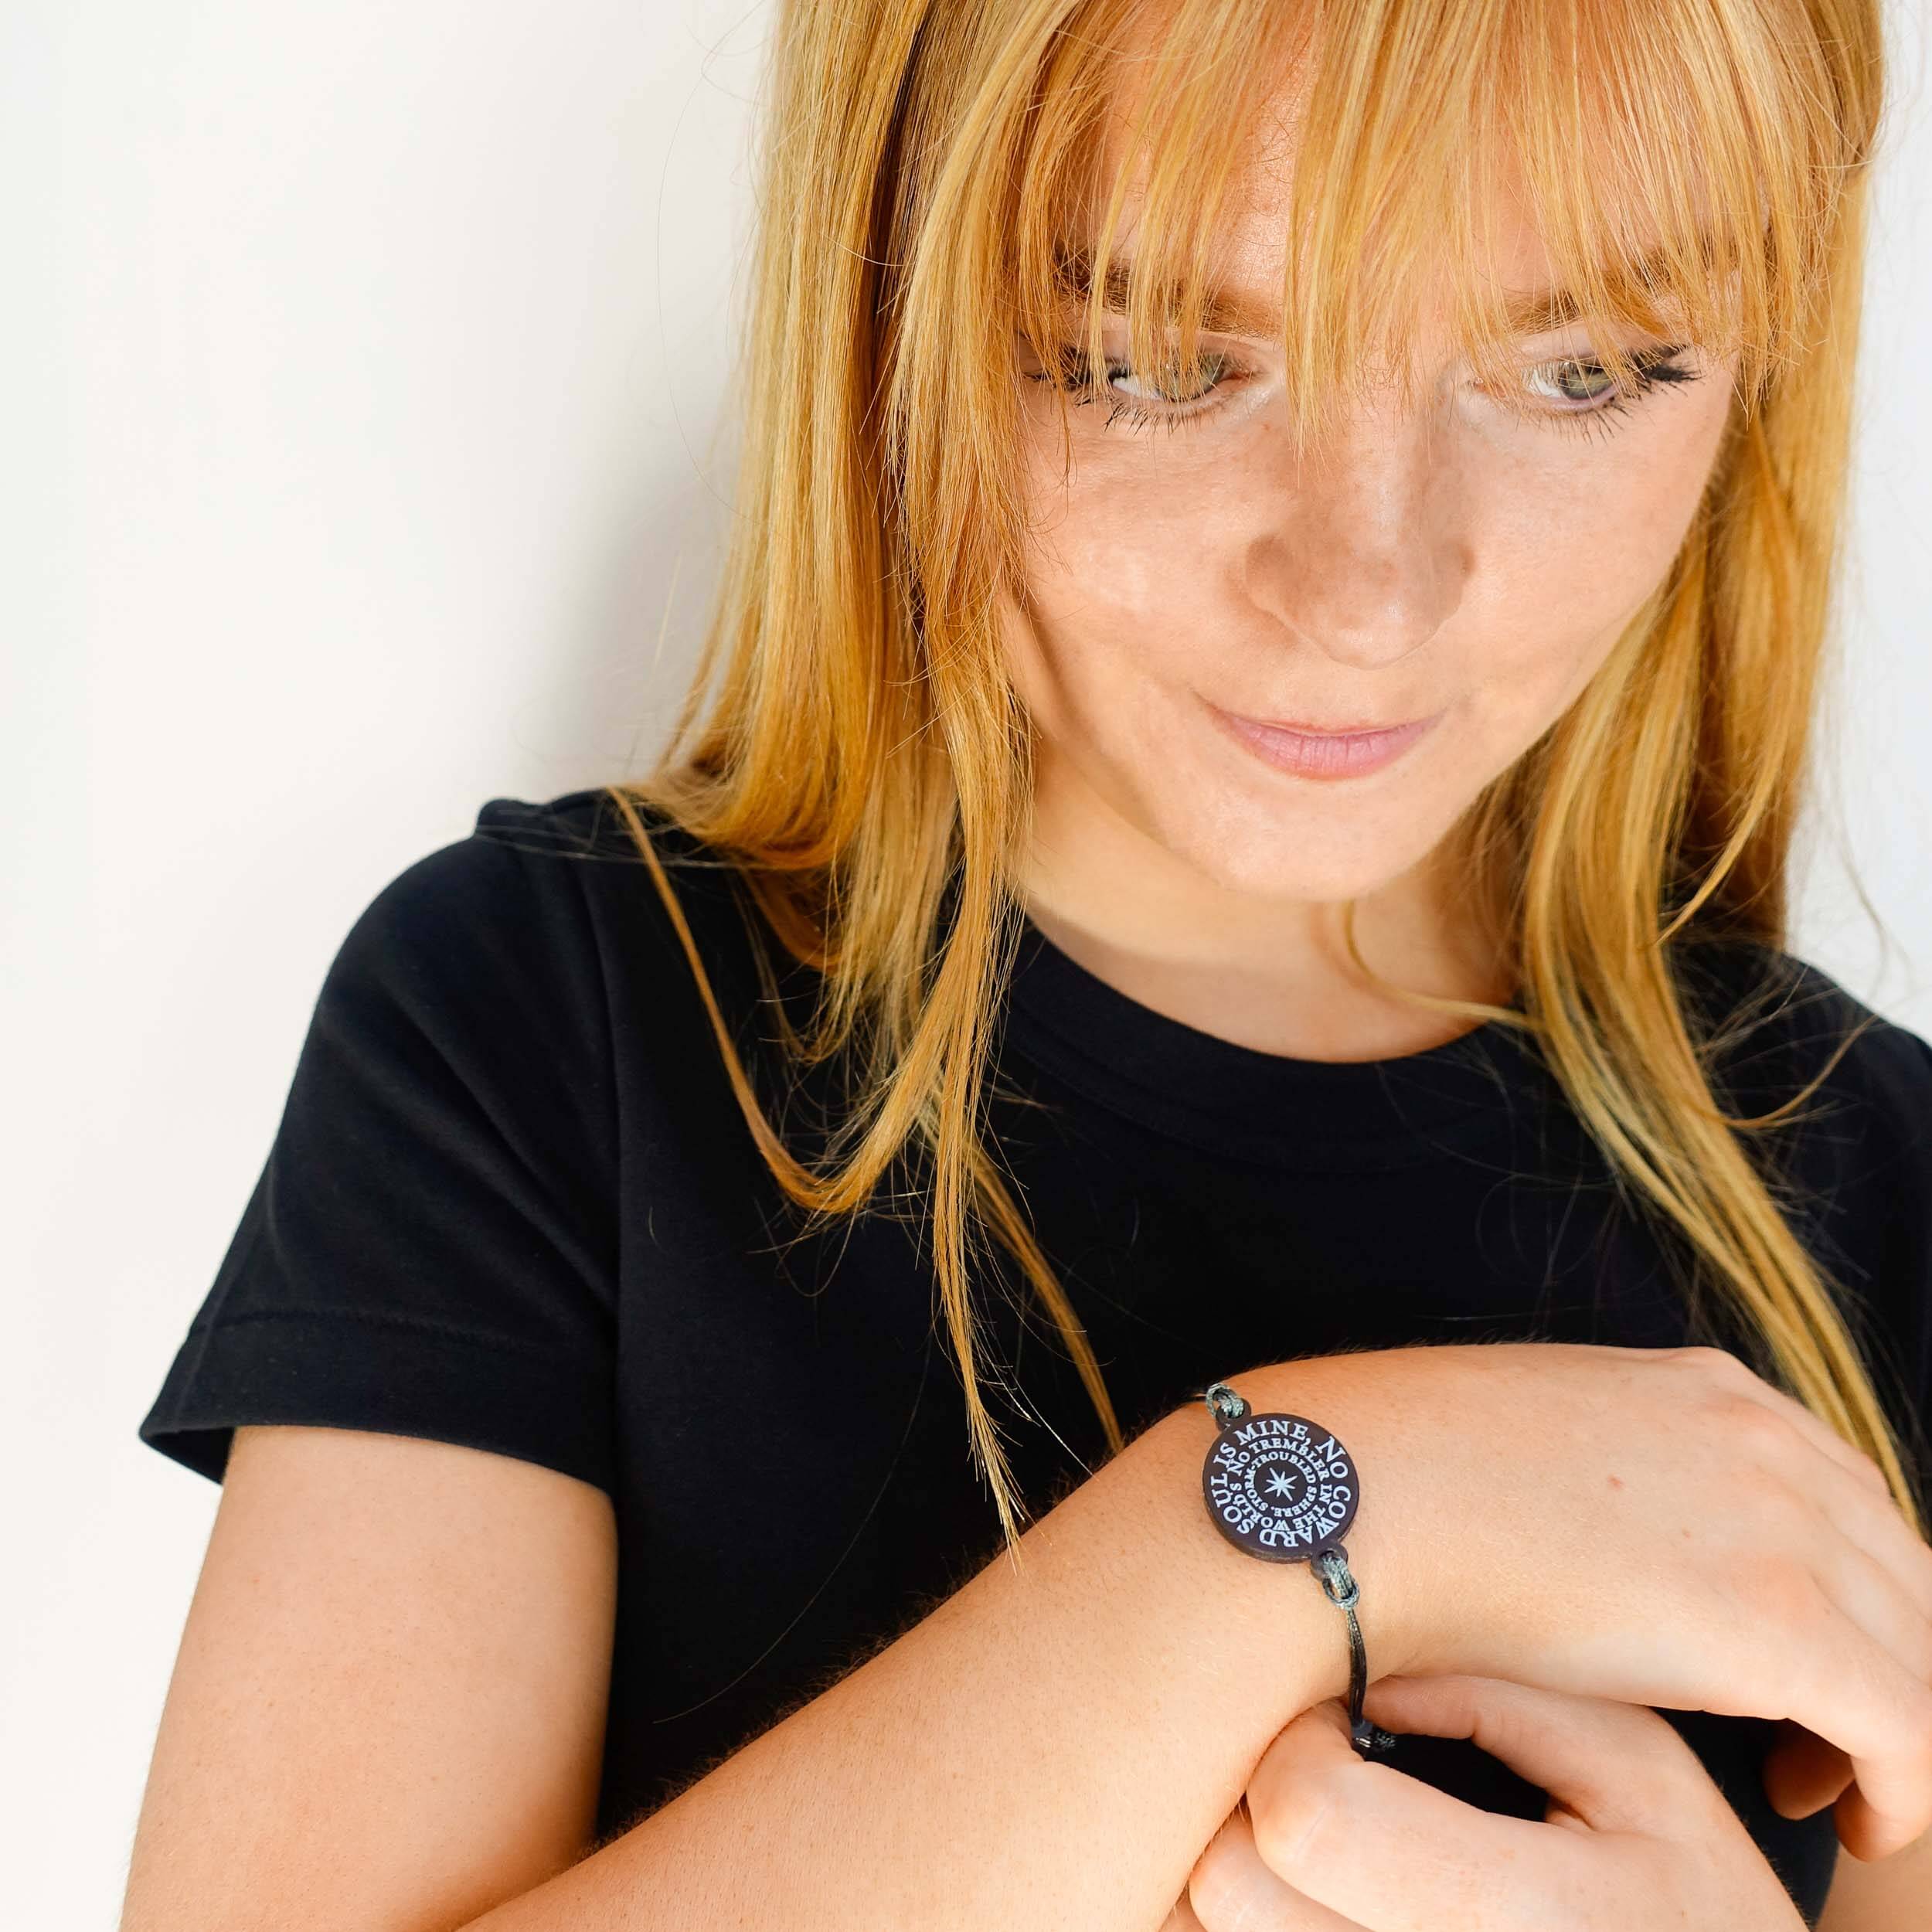 Eliza wears a 'No Coward Soul is Mine' bracelet designed by Sarah Day for The Brontë Collection for Wear and Resist. 